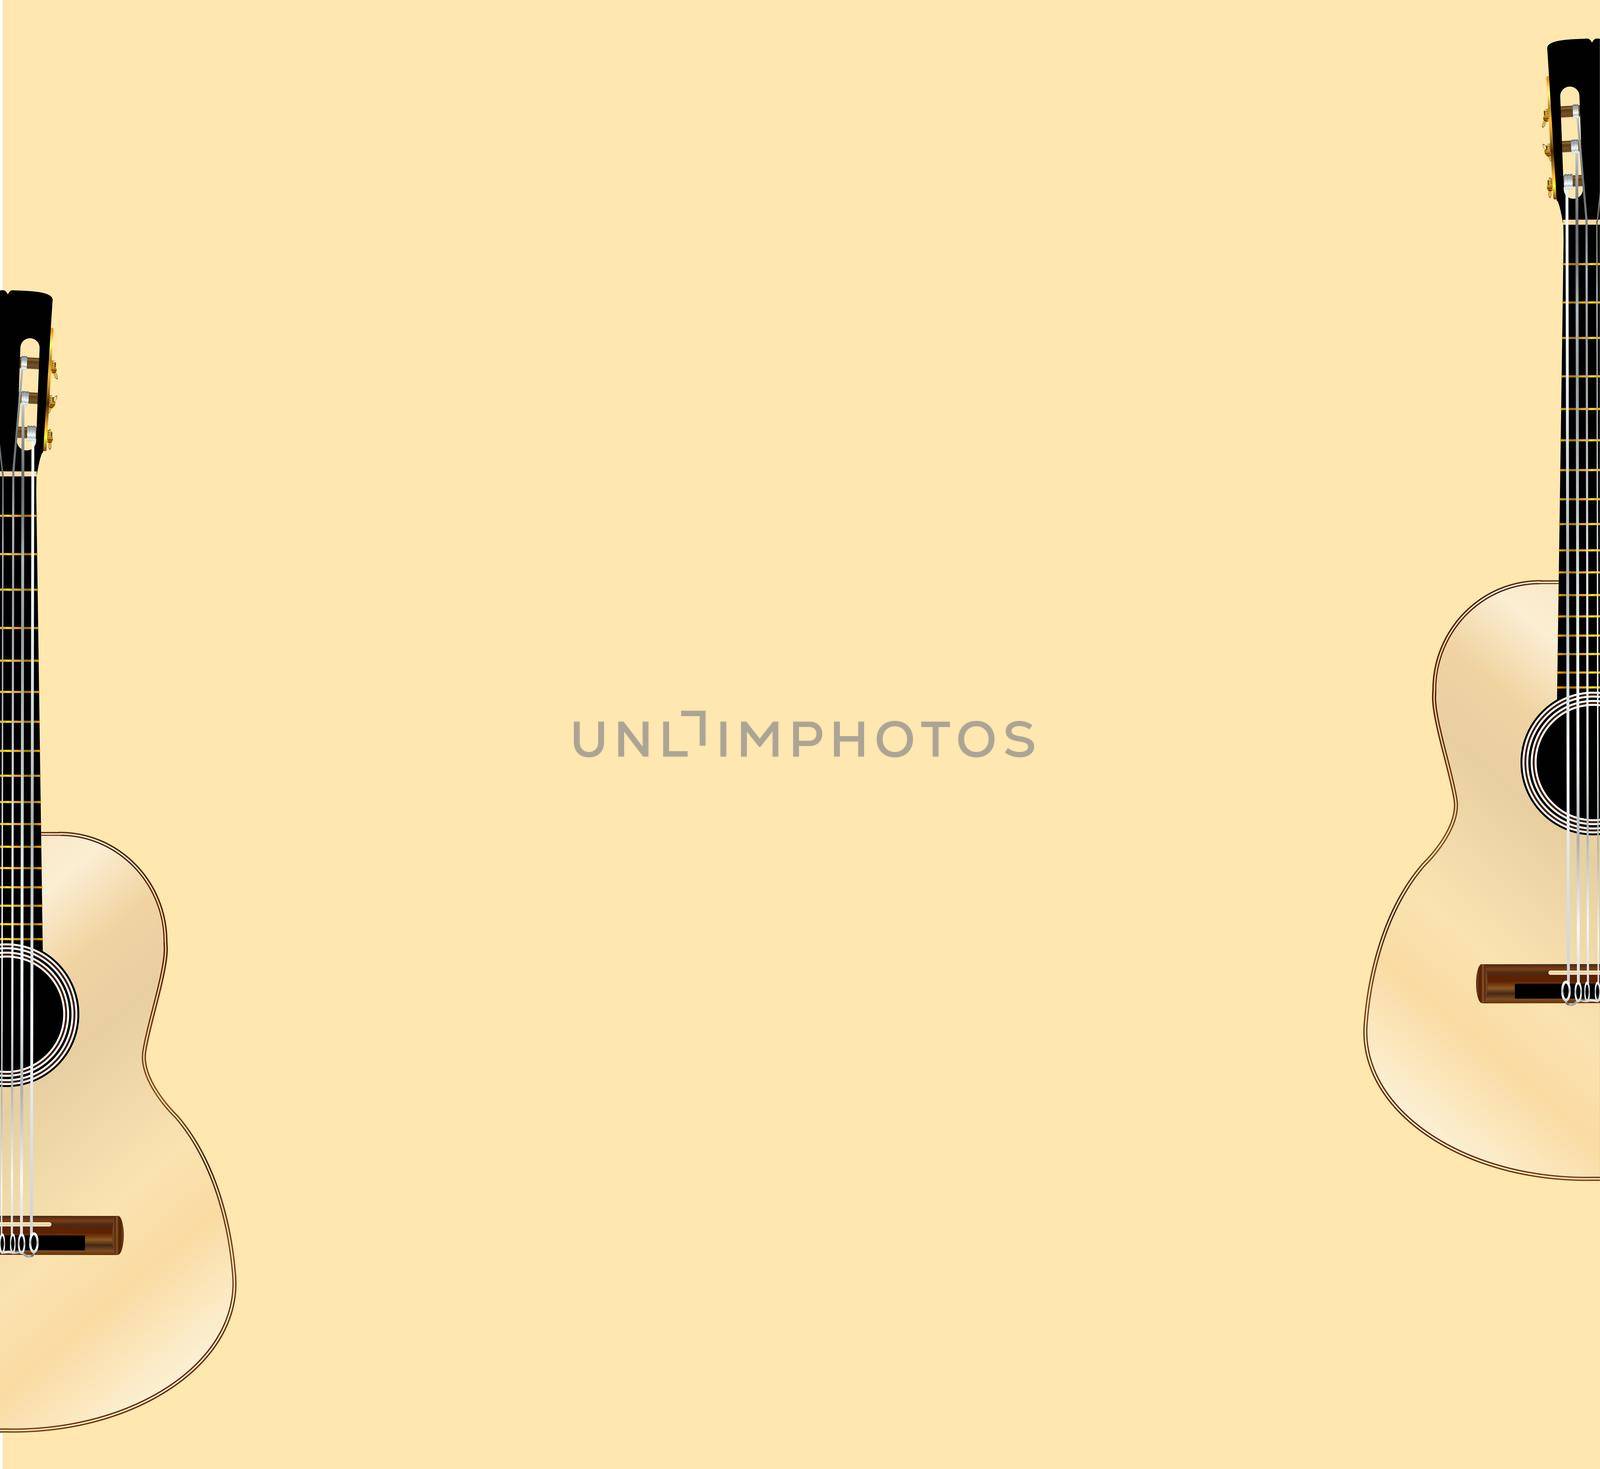 A typical Flamenco Spanish acoustic guitar set in 2 halves on a pale yellow background